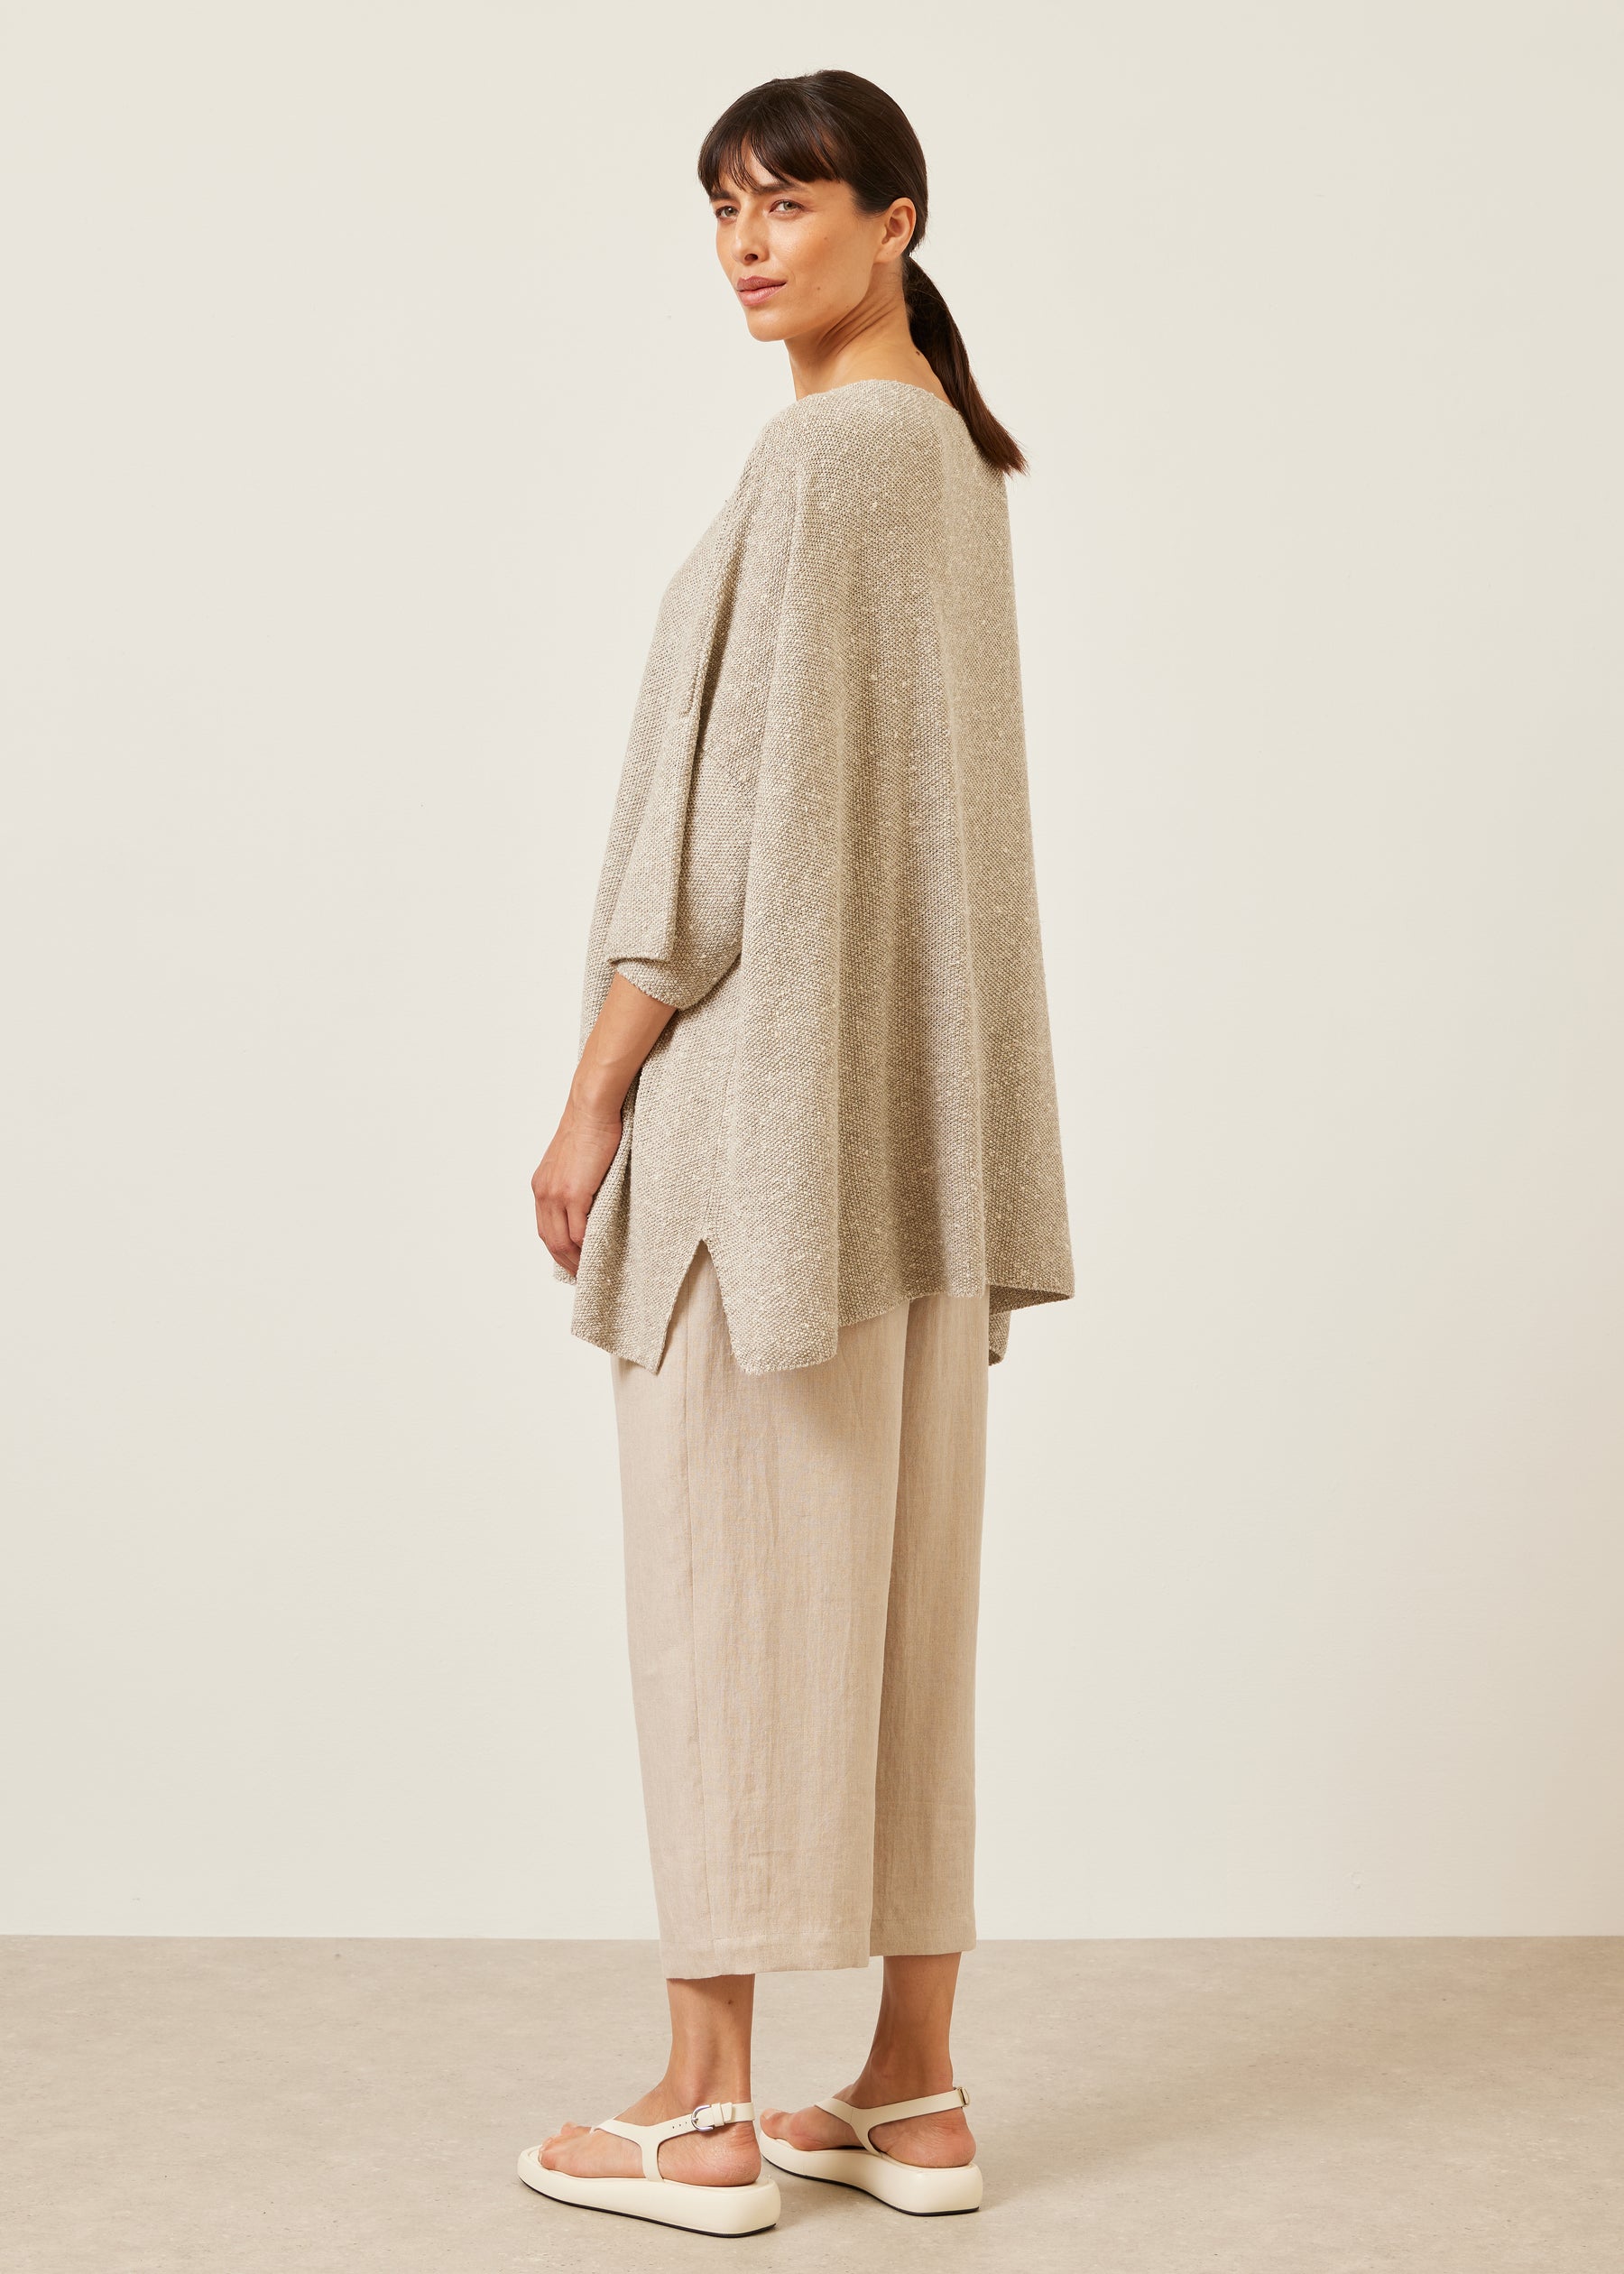 square 3/4 sleeve sweater - long